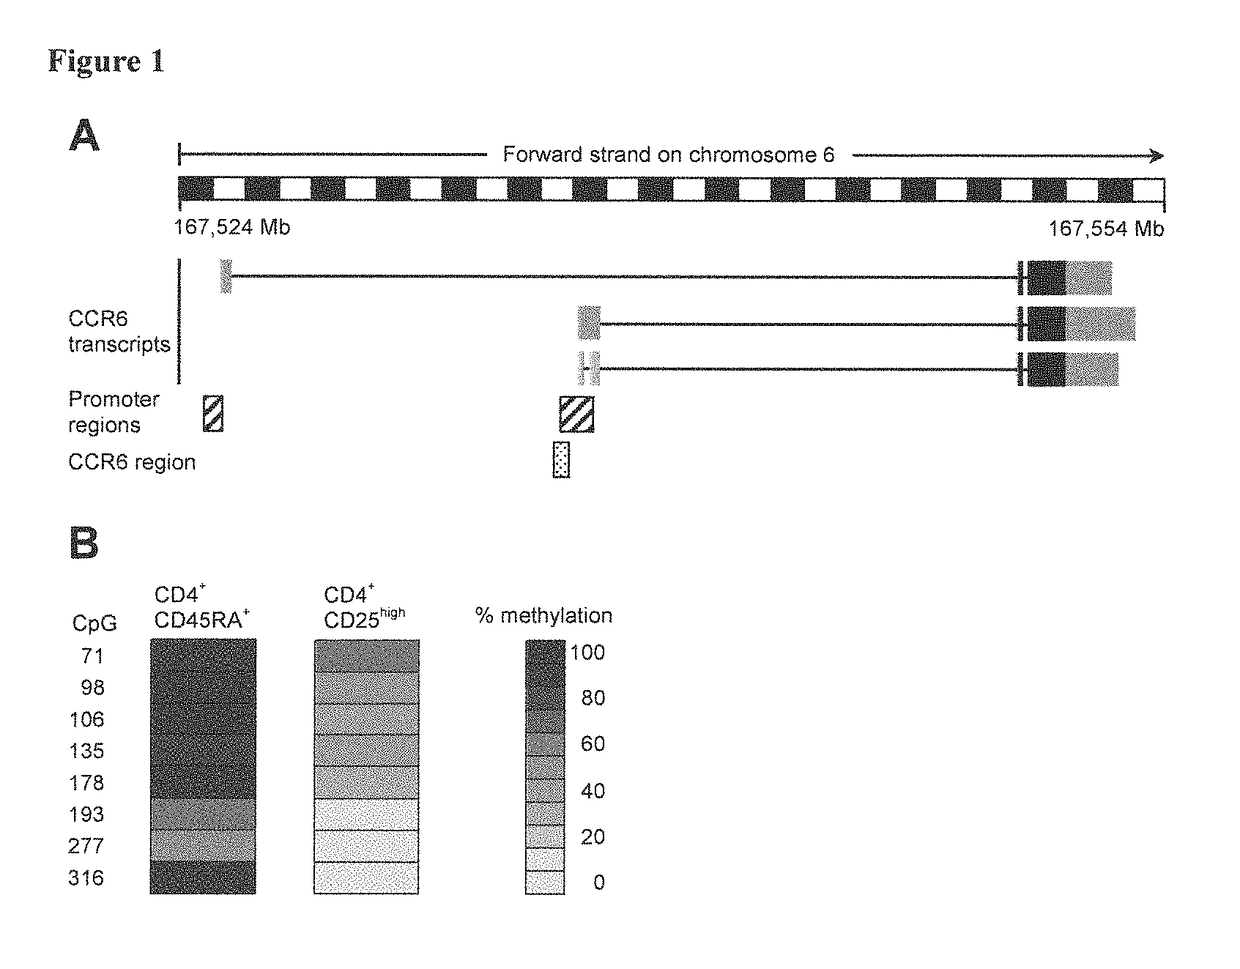 Detection of immune cells, in particular T cells through DNA-methylation analysis of the genes <i>CCR6 </i>and <i>BLR1</i>